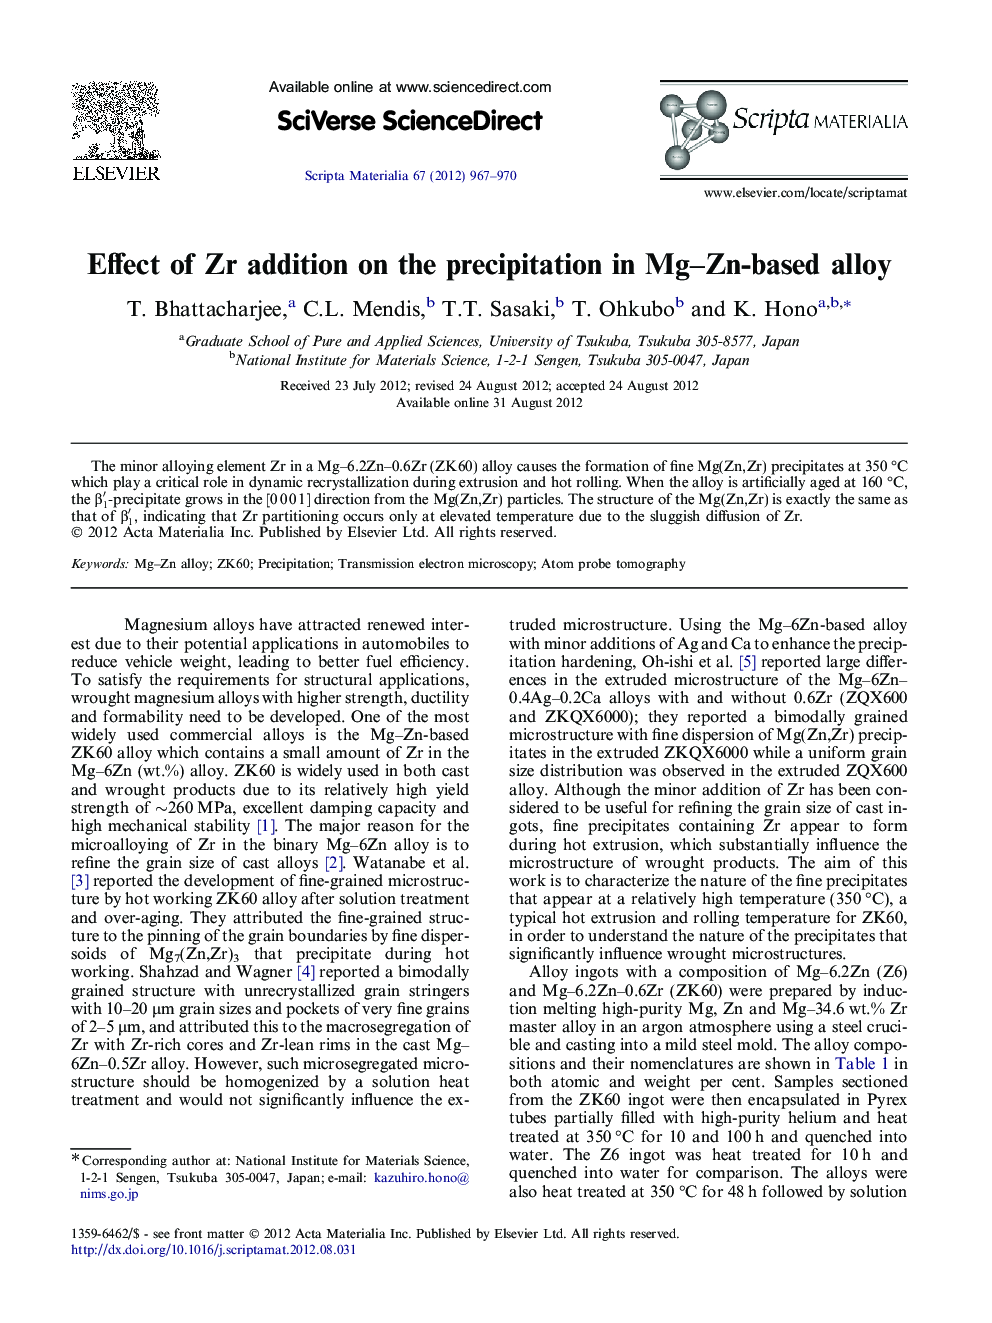 Effect of Zr addition on the precipitation in Mg–Zn-based alloy